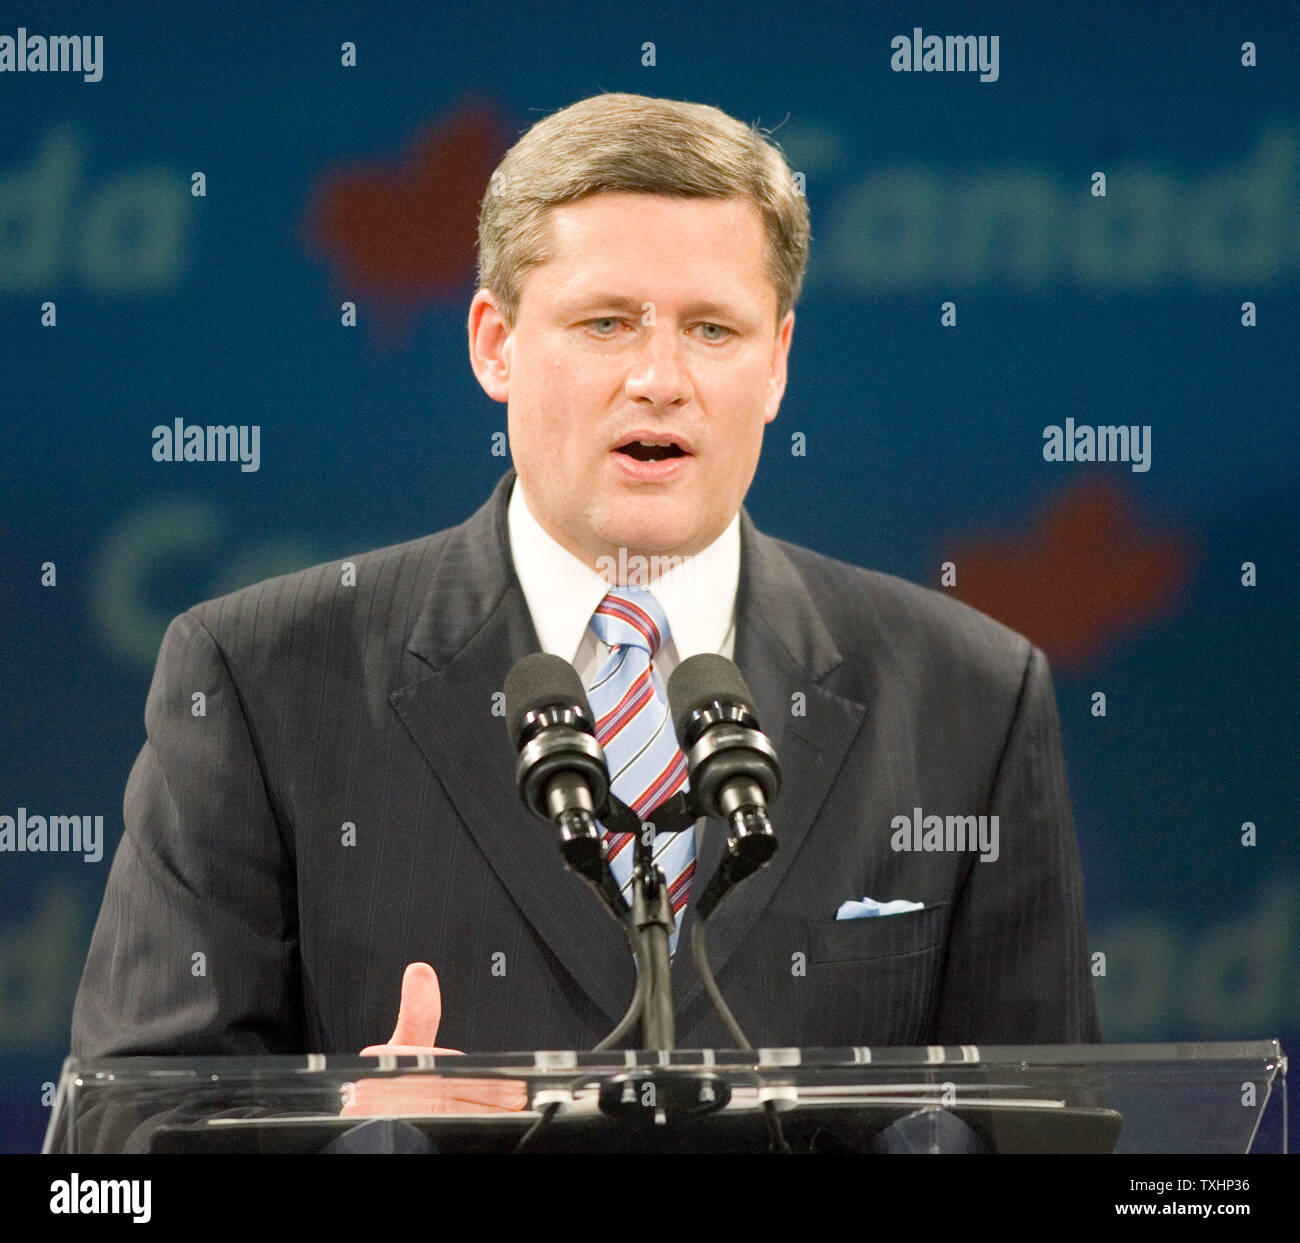 Federal Conservative leader Stephen Harper gives his victory speech to supporters at his campaign headquarters in the Telus Convention Center in Calgary, Alberta after winning the Canada federal election with a minority, January 23, 2006. (UPI Photo/Heinz Ruckemann) Stock Photo